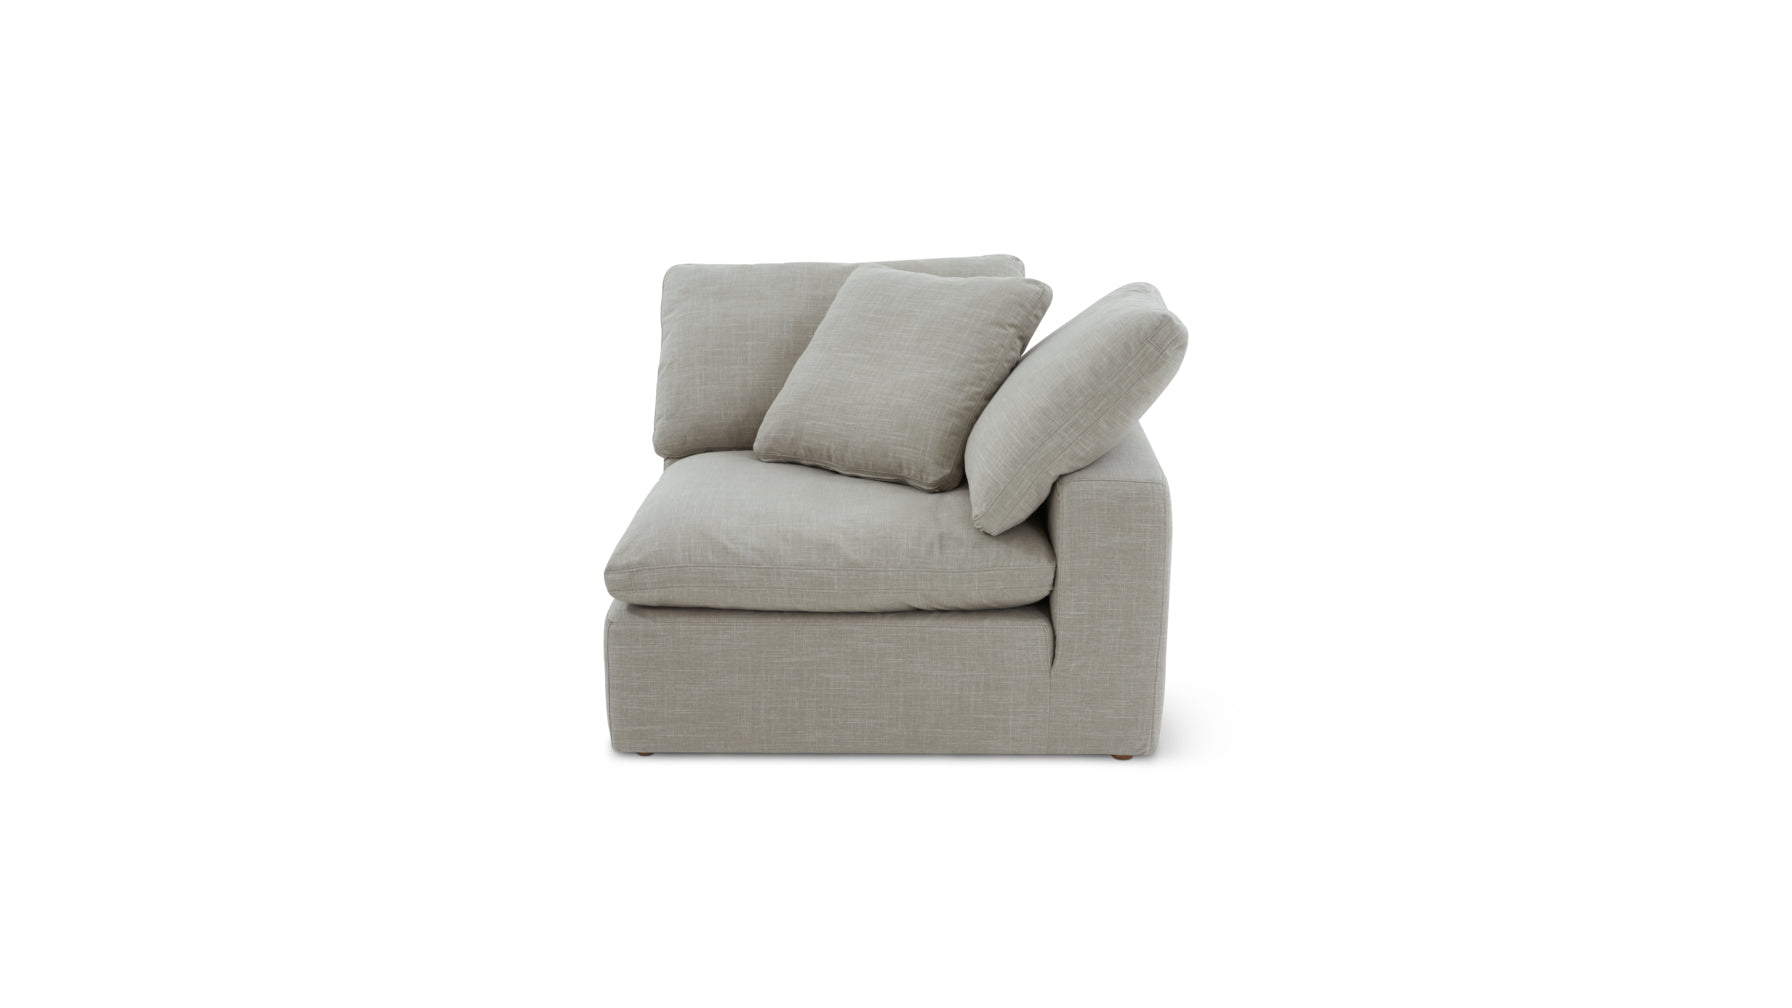 Movie Night™ Corner Chair, Large, Light Pebble (Left or Right) - Image 1